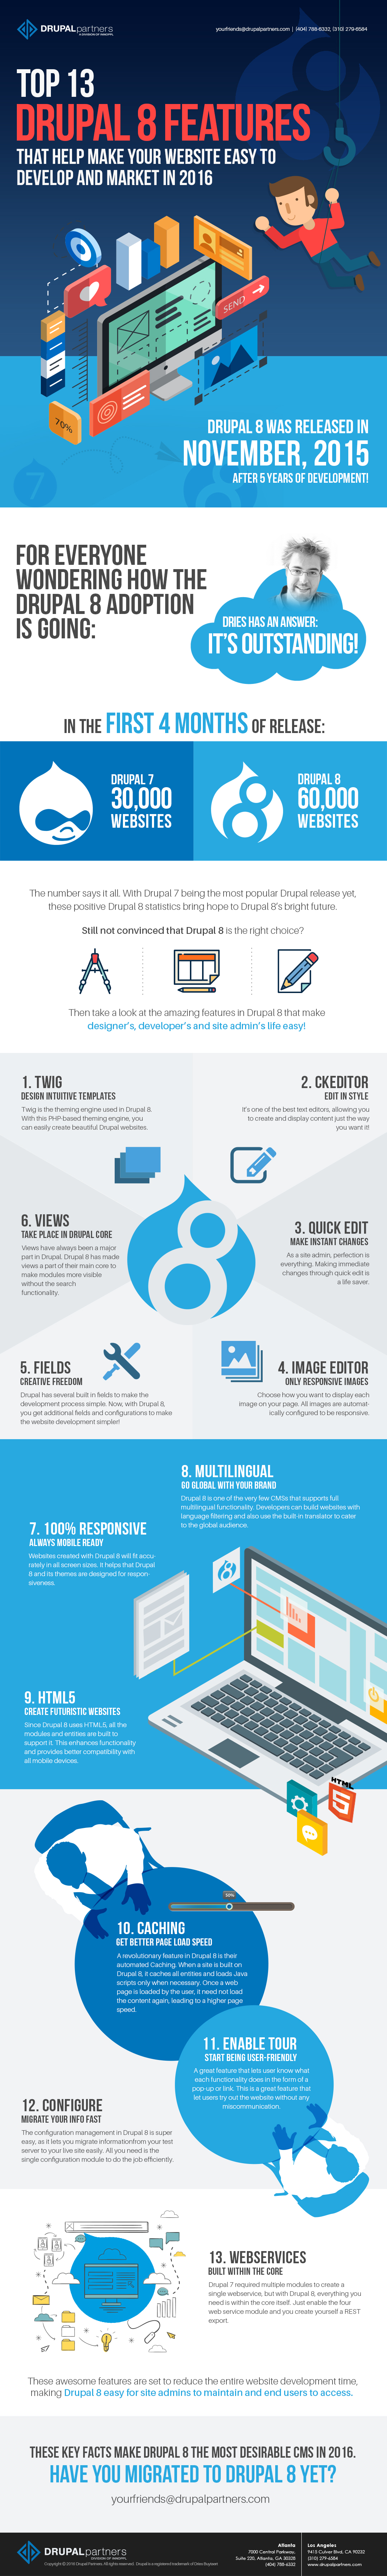 Top 13 Drupal 8 Features That Help Make Your Website Easy To Develop And Market In 2016